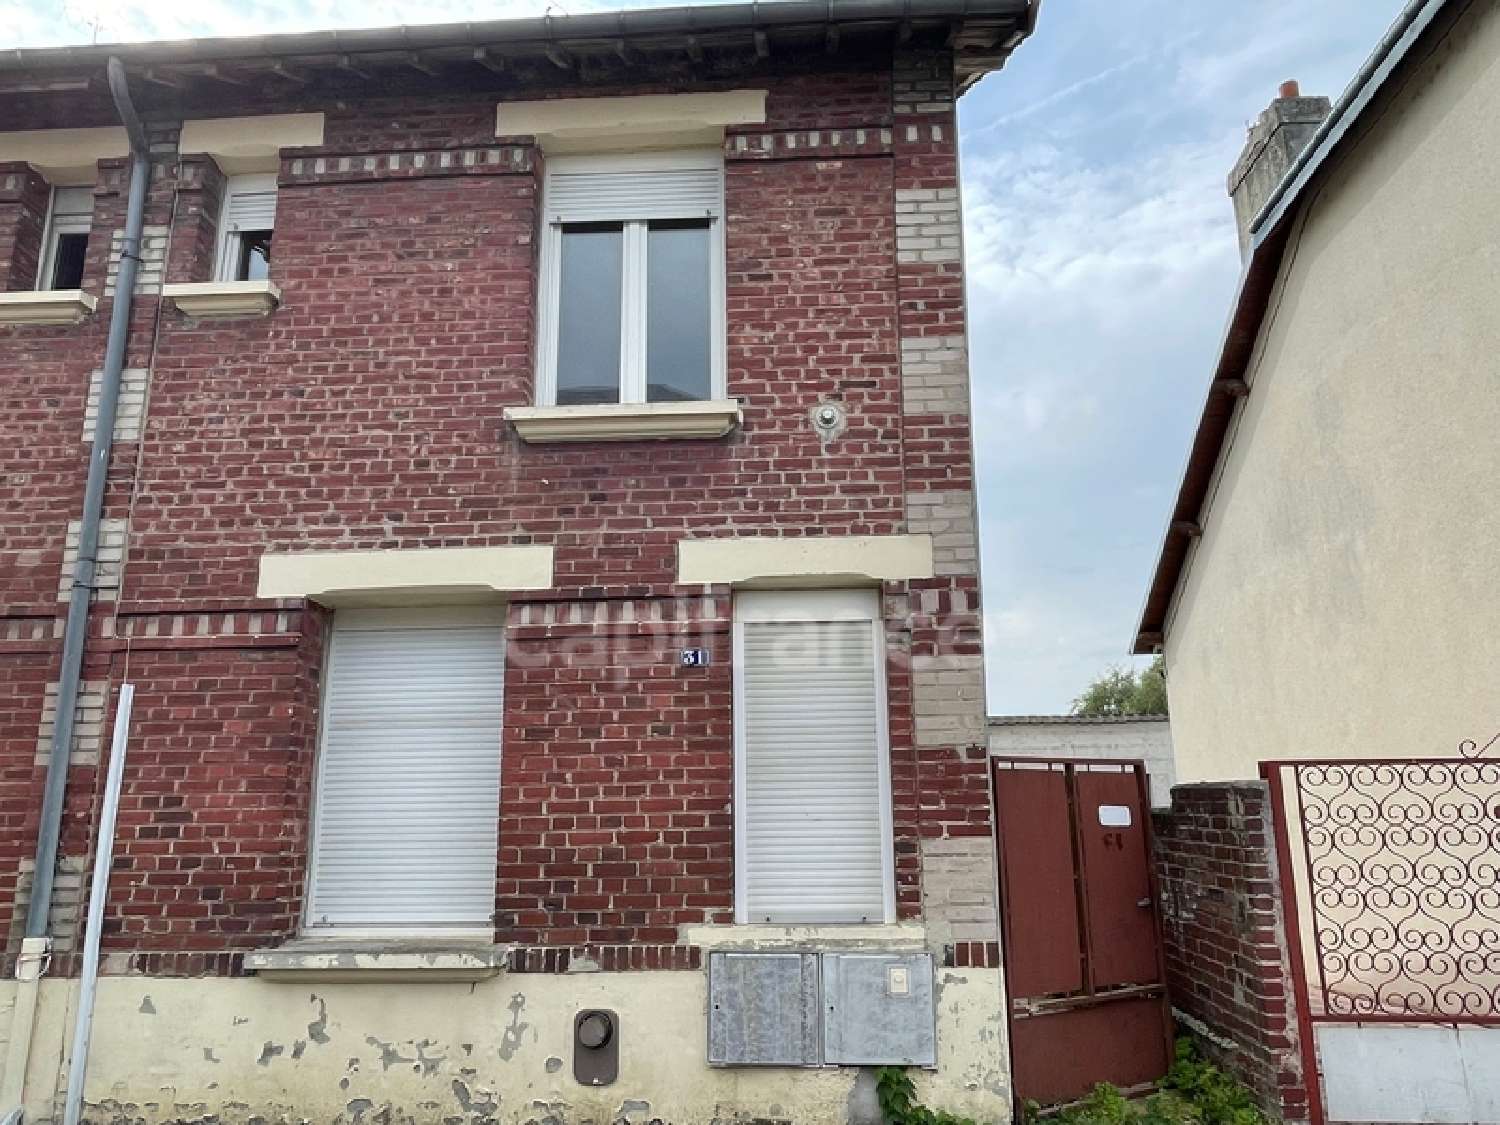  for sale house Tergnier Aisne 1